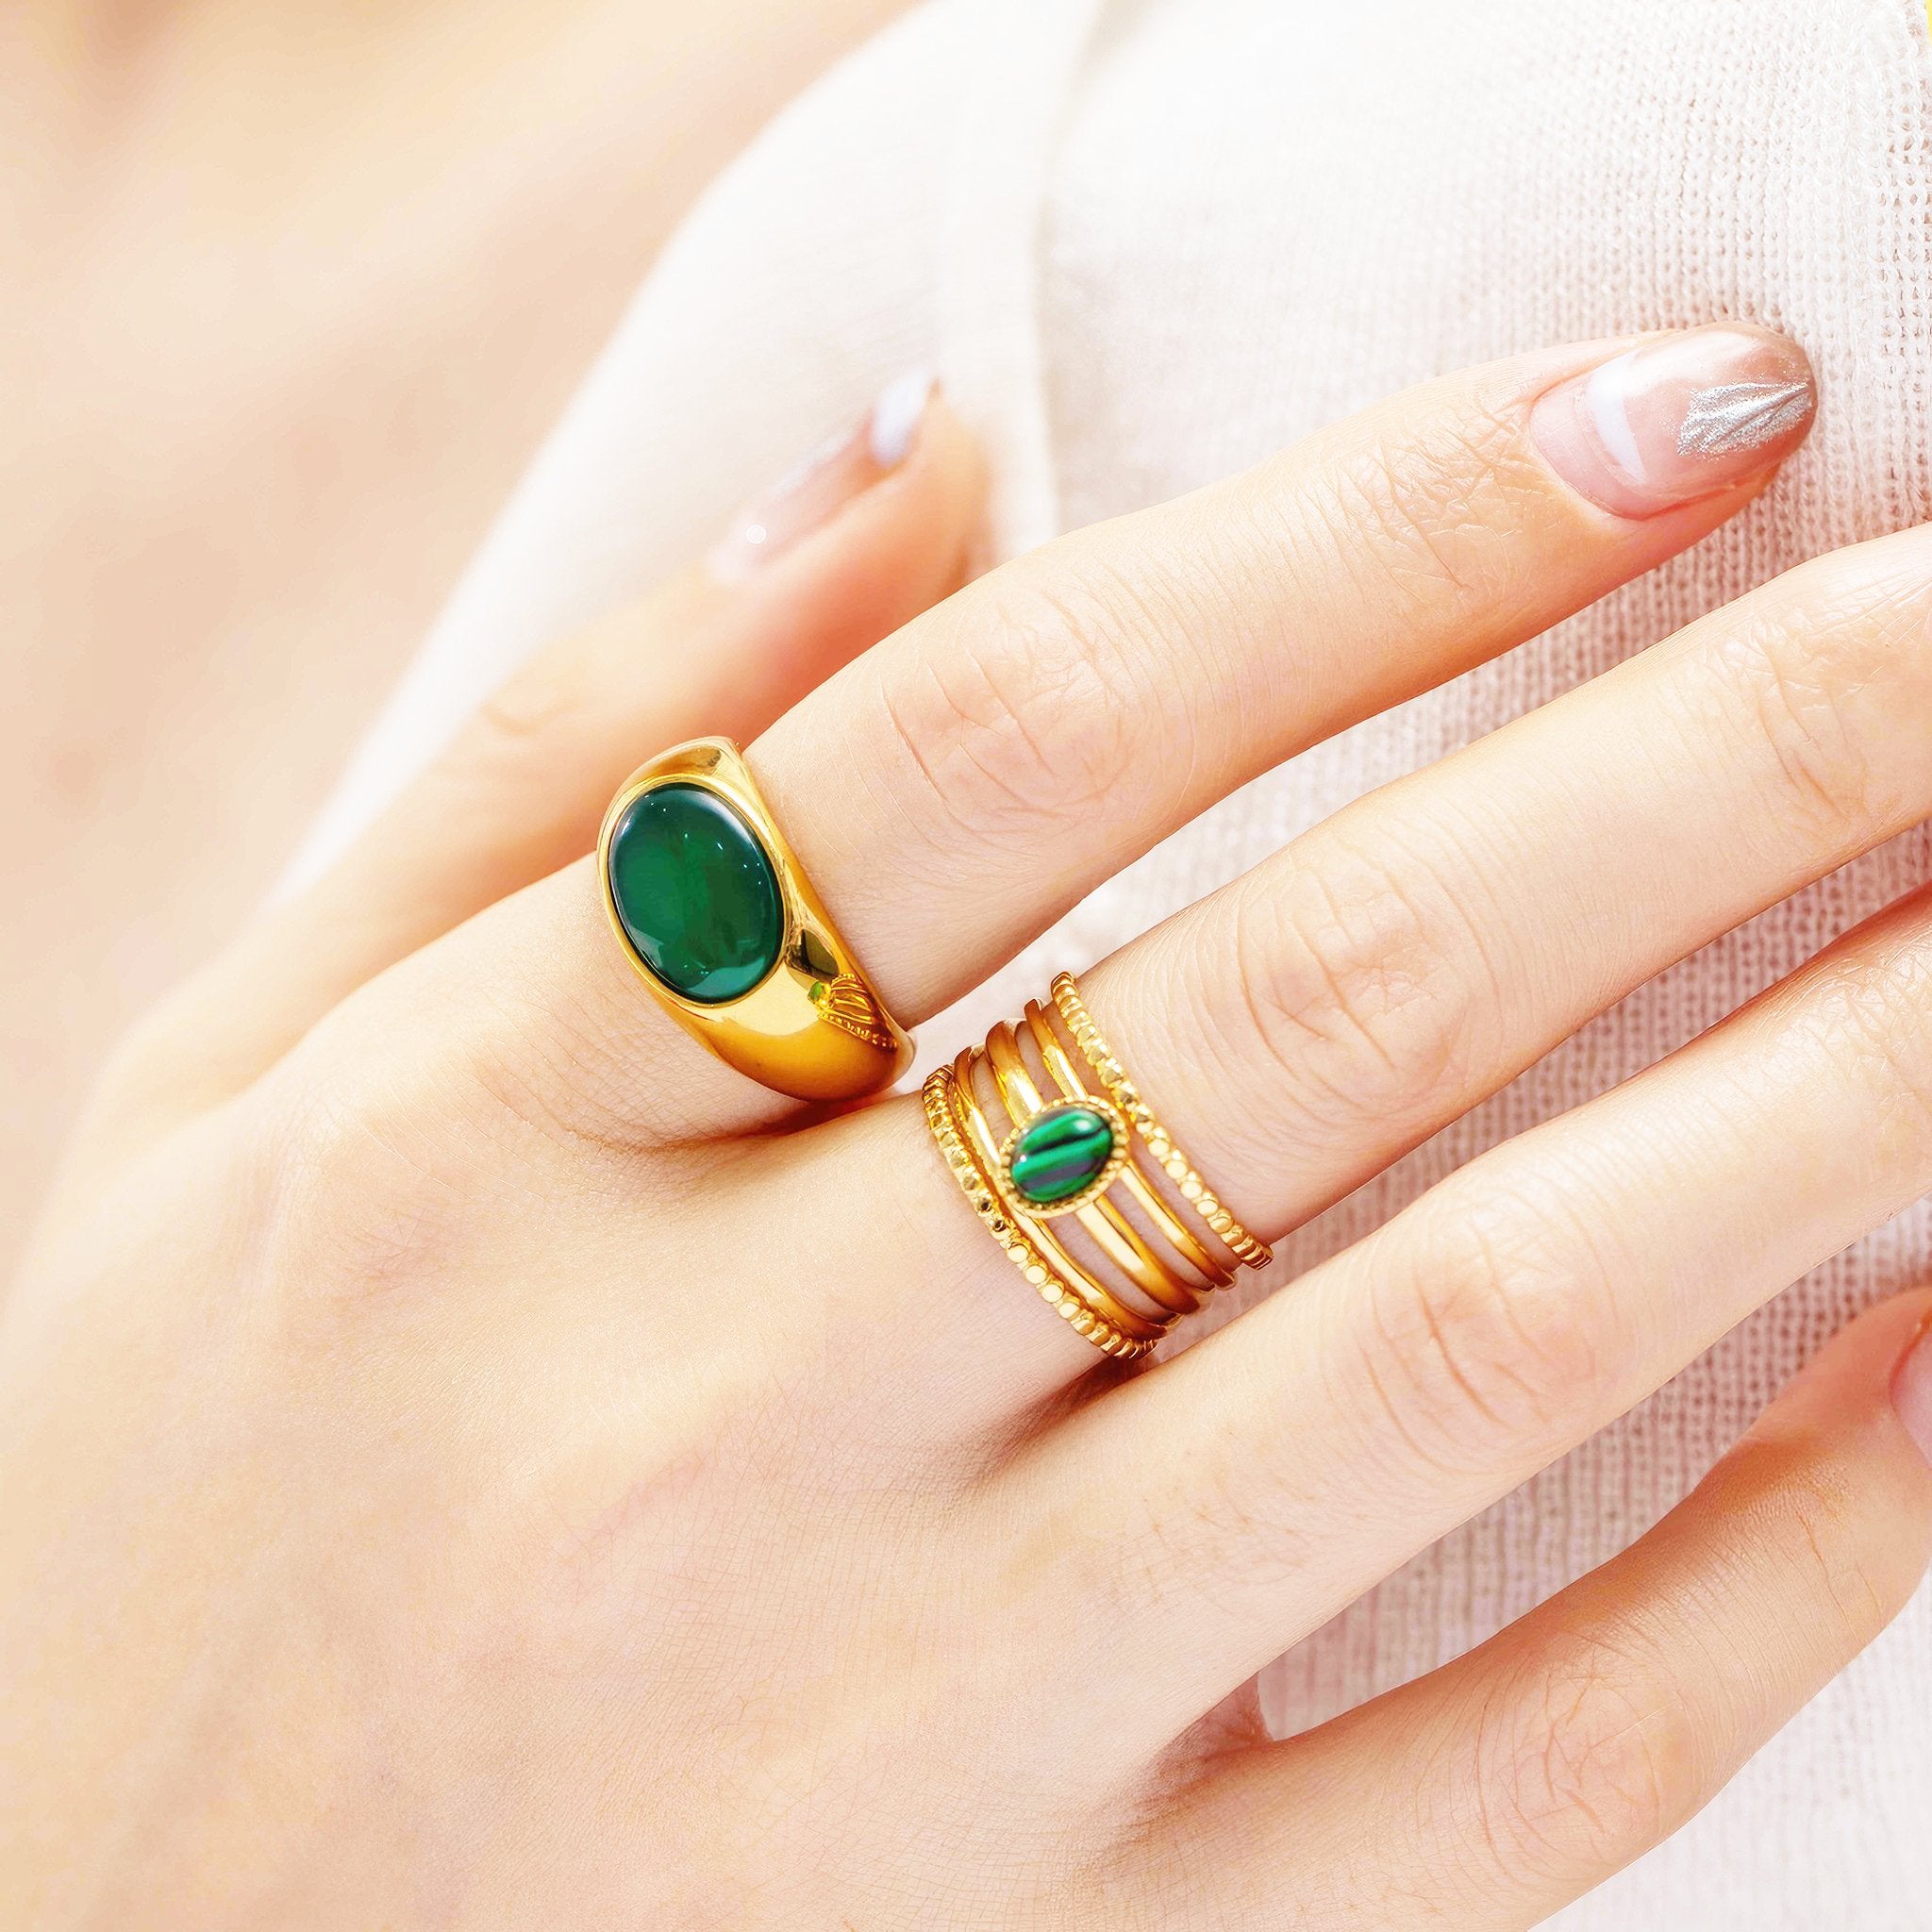 Oval Ring with Natural Chrysoprase - Nobbier - Ring - 18K Gold And Titanium PVD Coated Jewelry